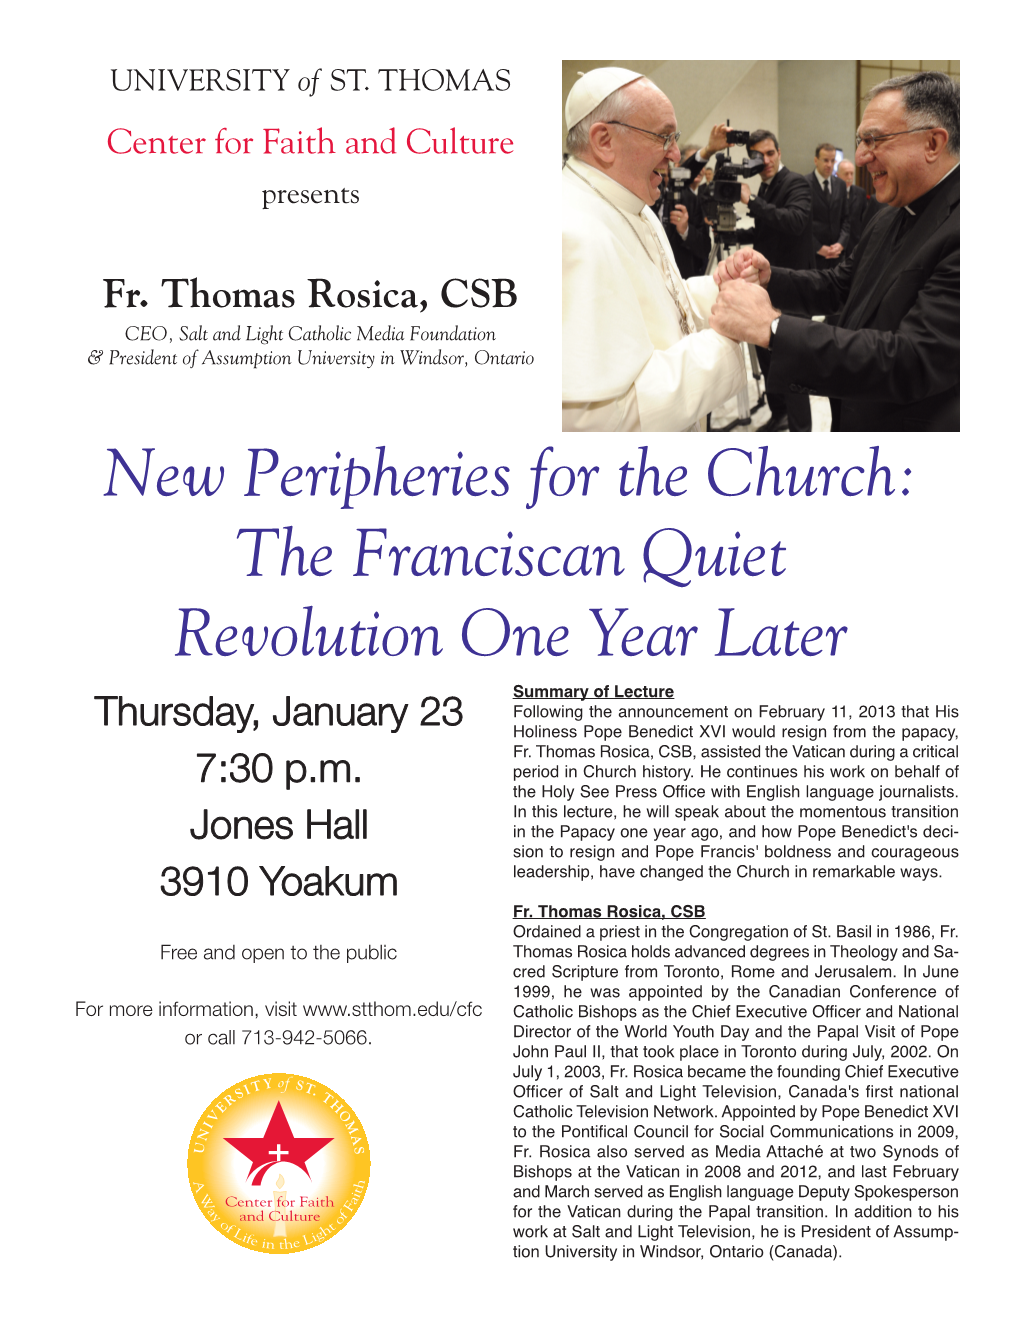 New Peripheries for the Church: the Franciscan Quiet Revolution One Year Later